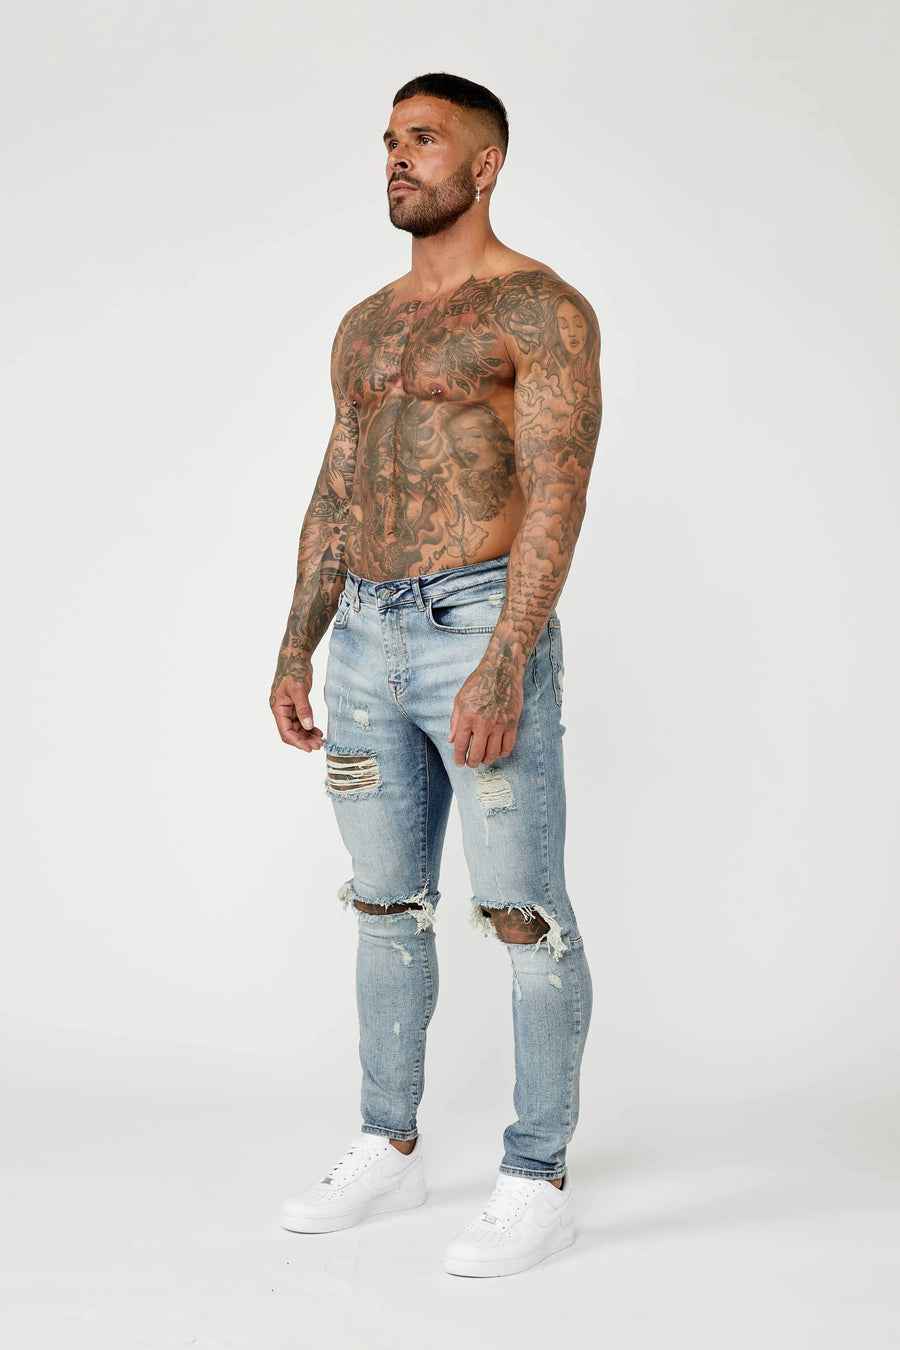 Legend London Jeans SKINNY FIT JEANS - MID BLUE RIPPED & REPAIRED